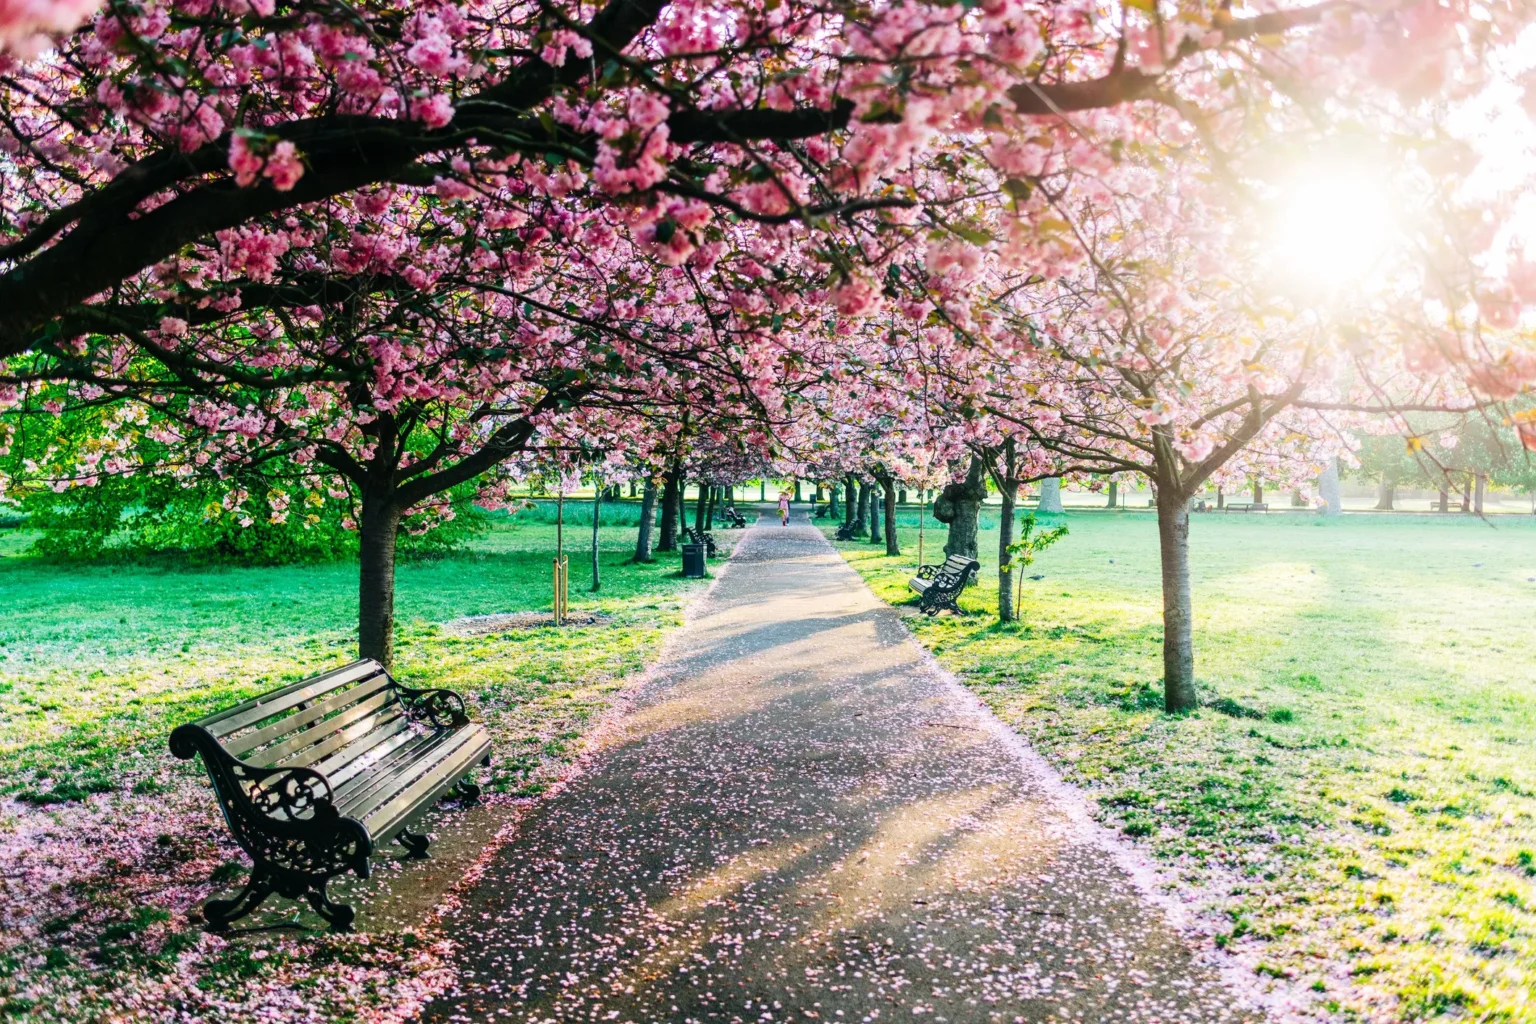 South London park voted best place to see cherry blossom in the capital